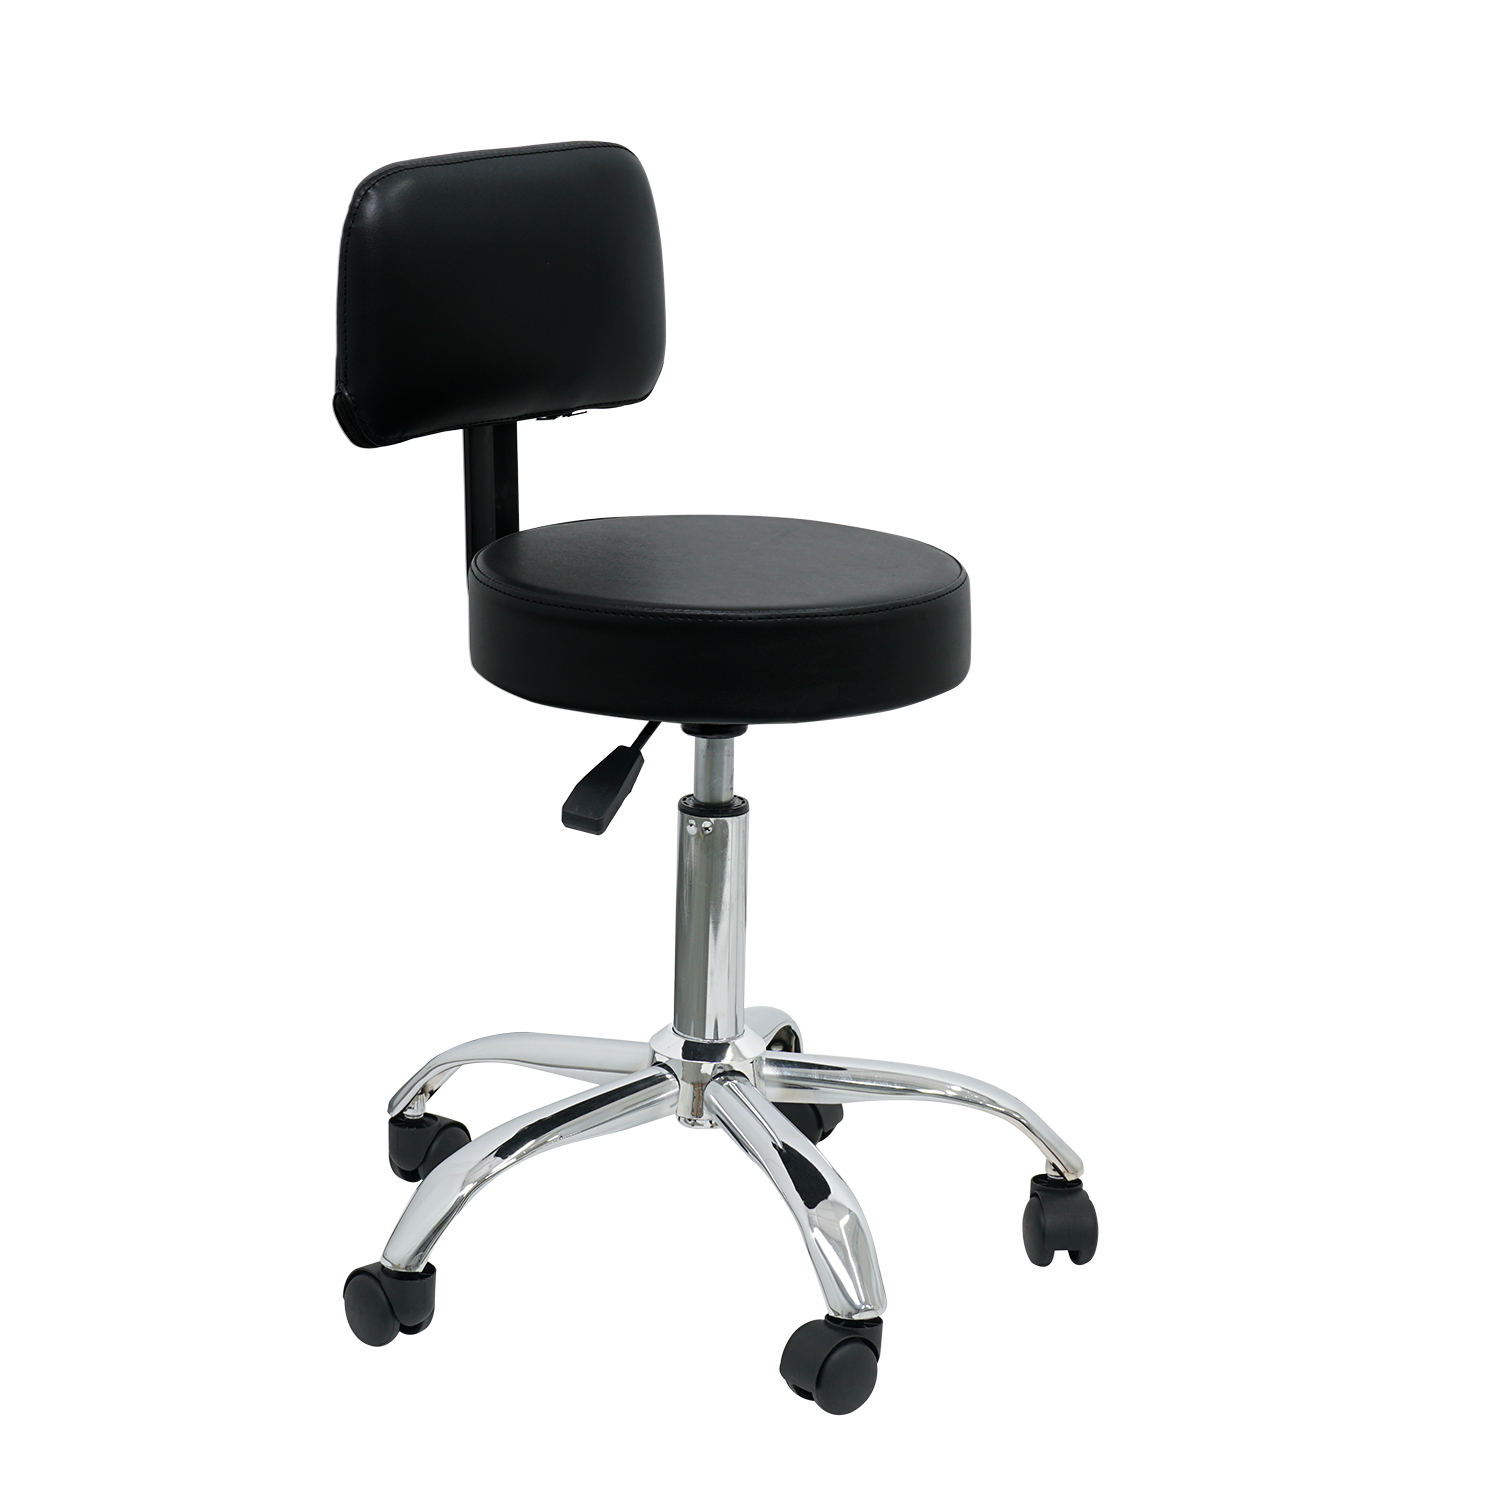 Pro stool with Back Rest | Black